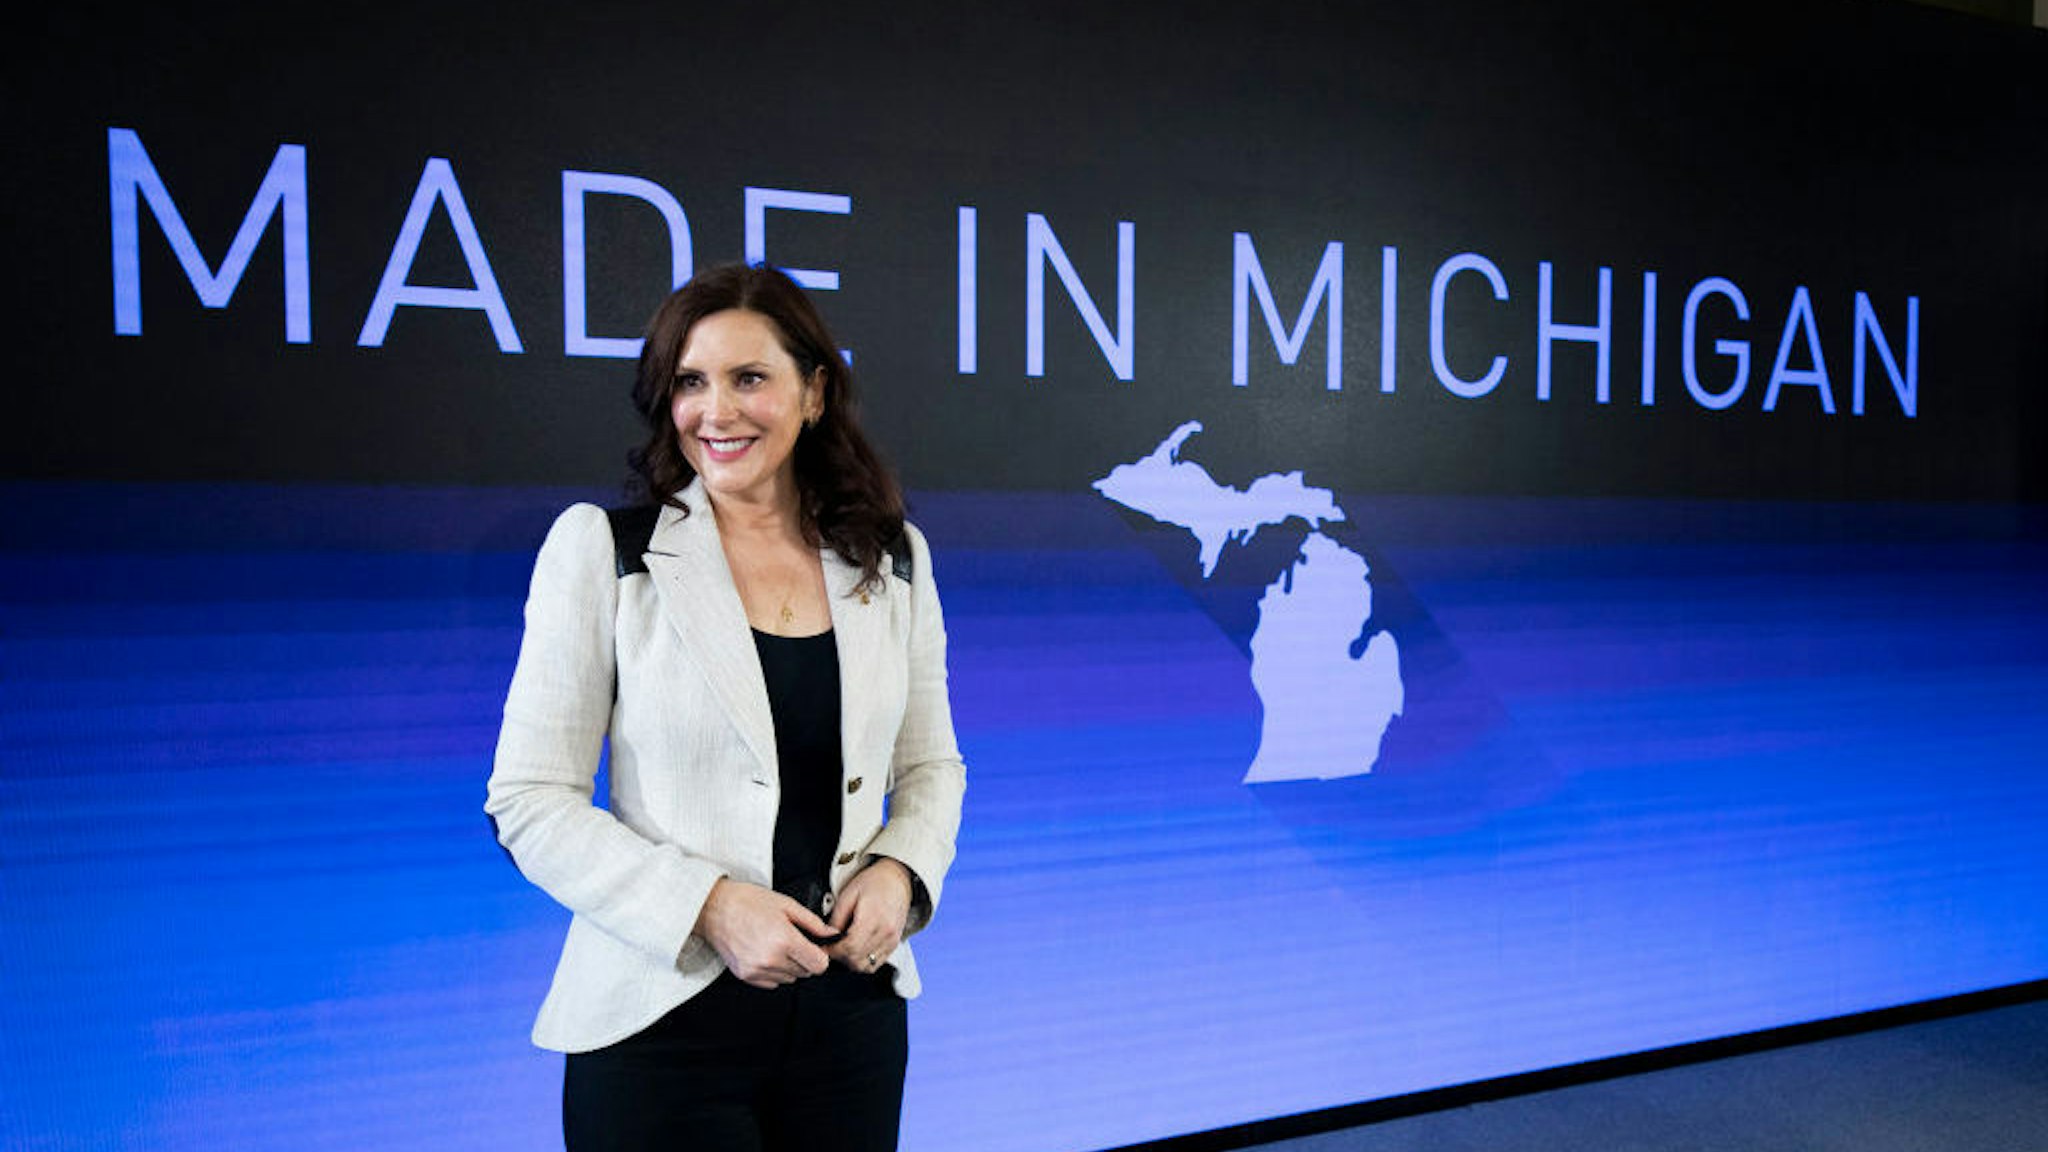 LANSING, MI - JANUARY 25: Michigan Governor Gretchen Whitmer poses for a photo after an event at which General Motors announced they are making a $7 billion investment, the largest in the company’s history, in electric vehicle and battery production in the state of Michigan on January 25, 2022 in Lansing, Michigan. The investment will be used at 4 facilities in Michigan and will create 4,000 jobs. (Photo by Bill Pugliano/Getty Images)